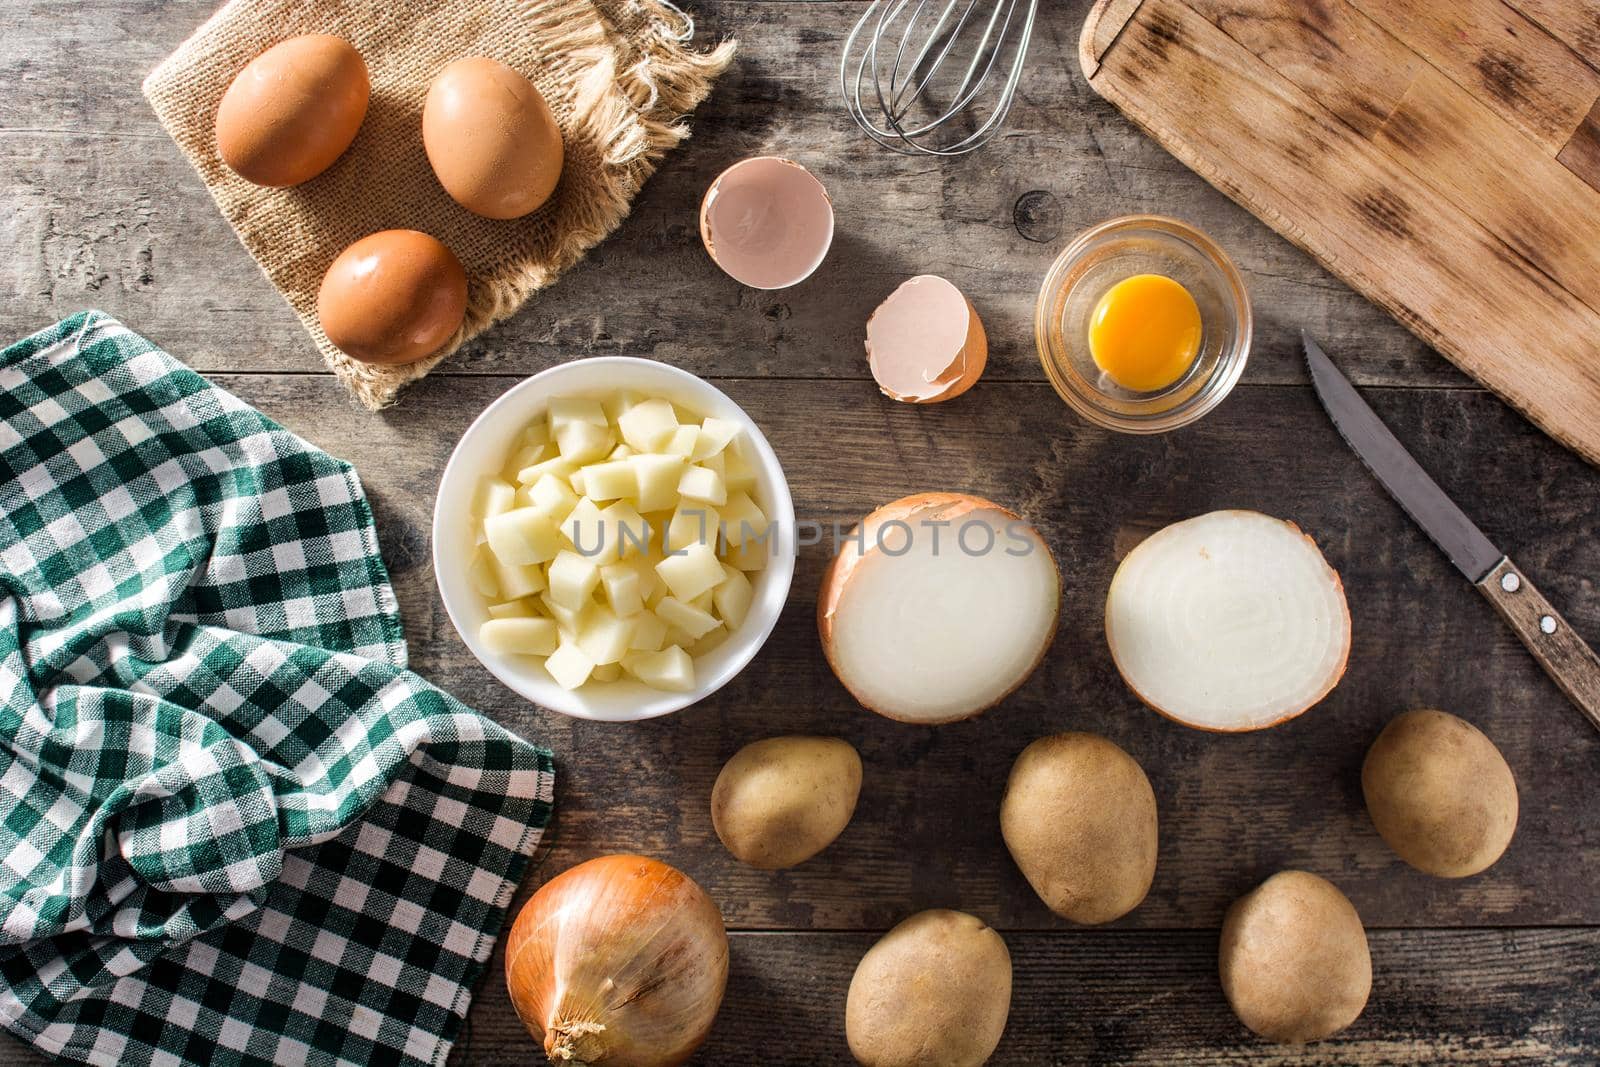 Spanish omelette tortilla ingredients: eggs, potatoes and onion on wooden table